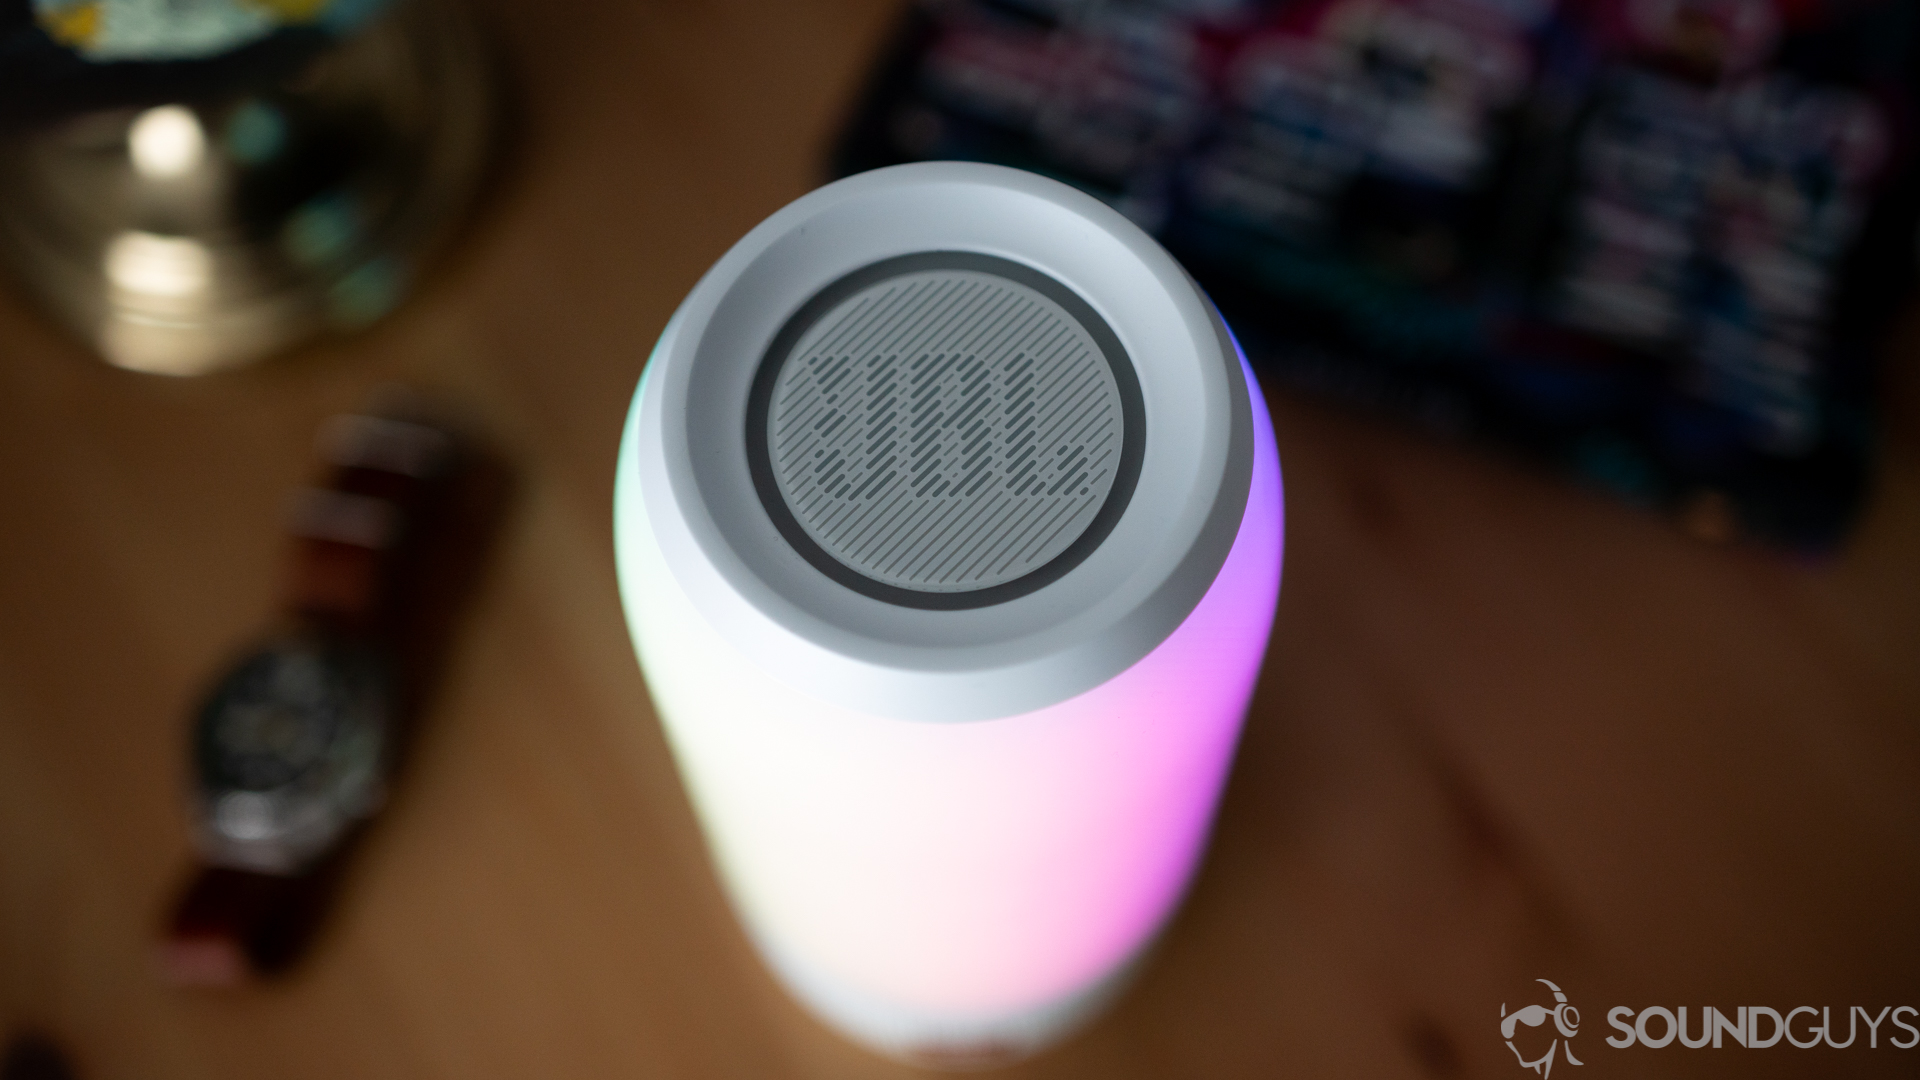 Shot of the JBL logo on the top of the Pulse 3 speaker with a watch and globe in the background. 